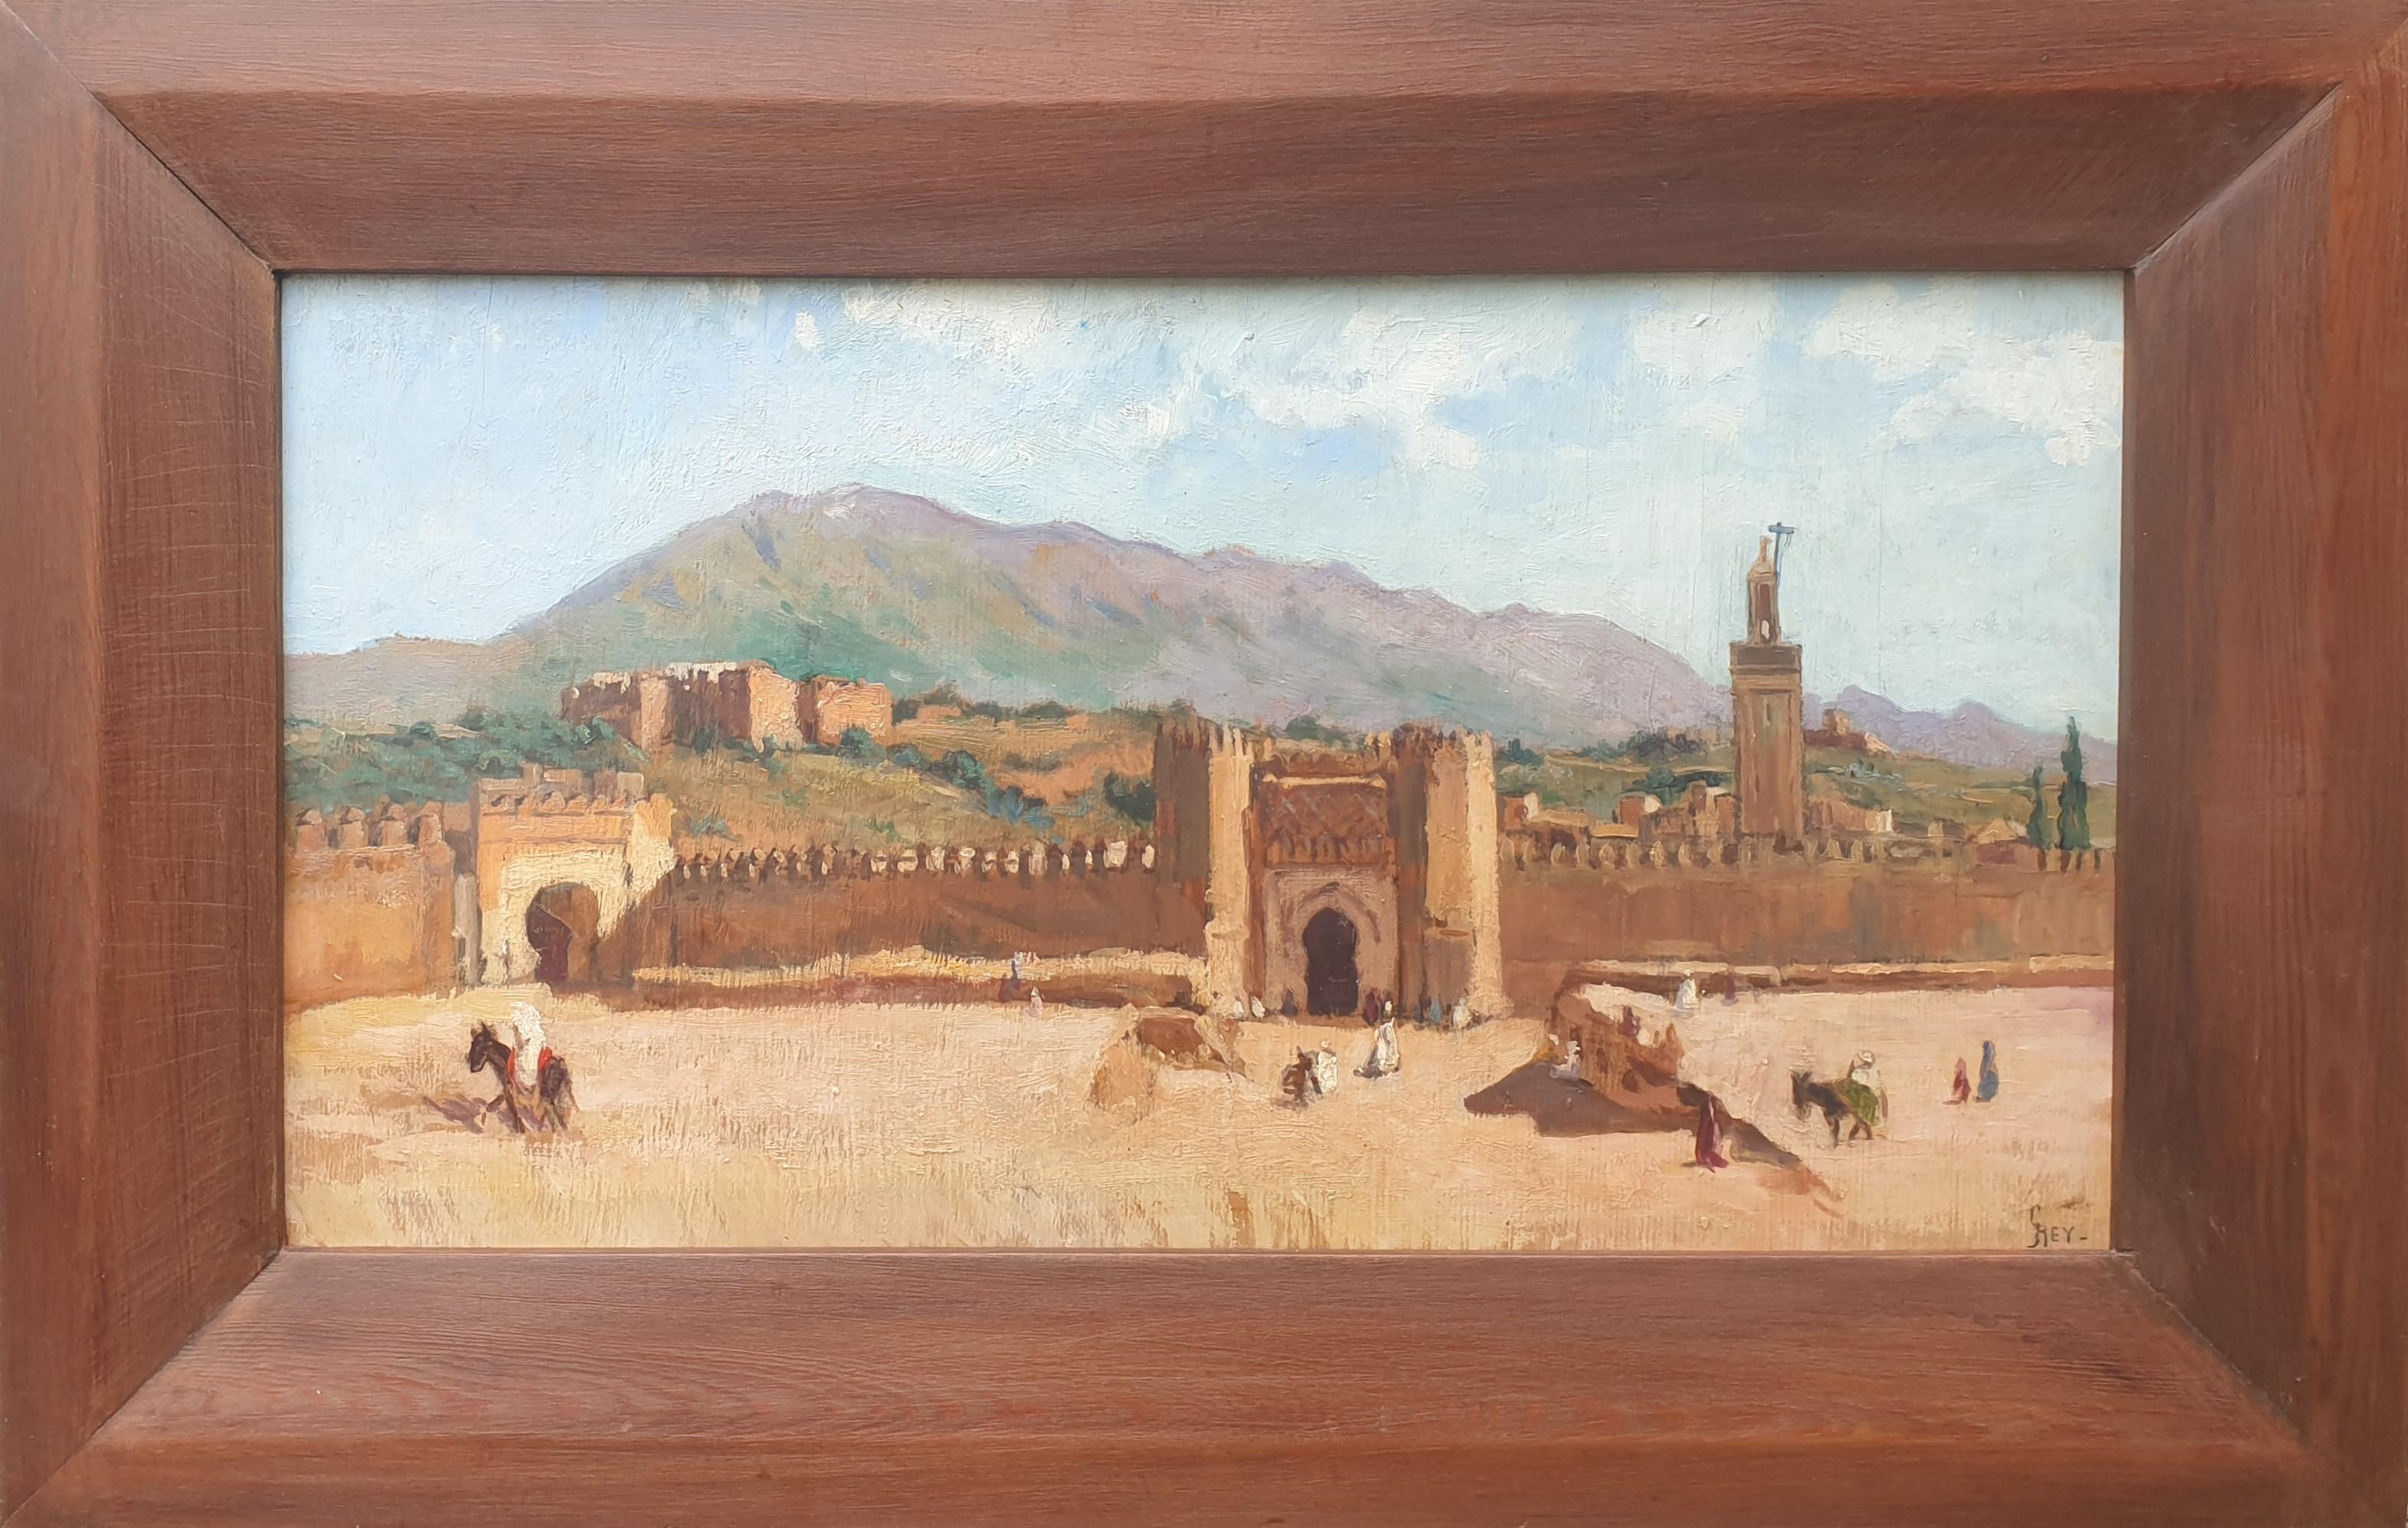 Germaine REY Landscape Painting - Painting orientalist REY with PONTOY Marocco Fez Boujloud square Bab Gate 